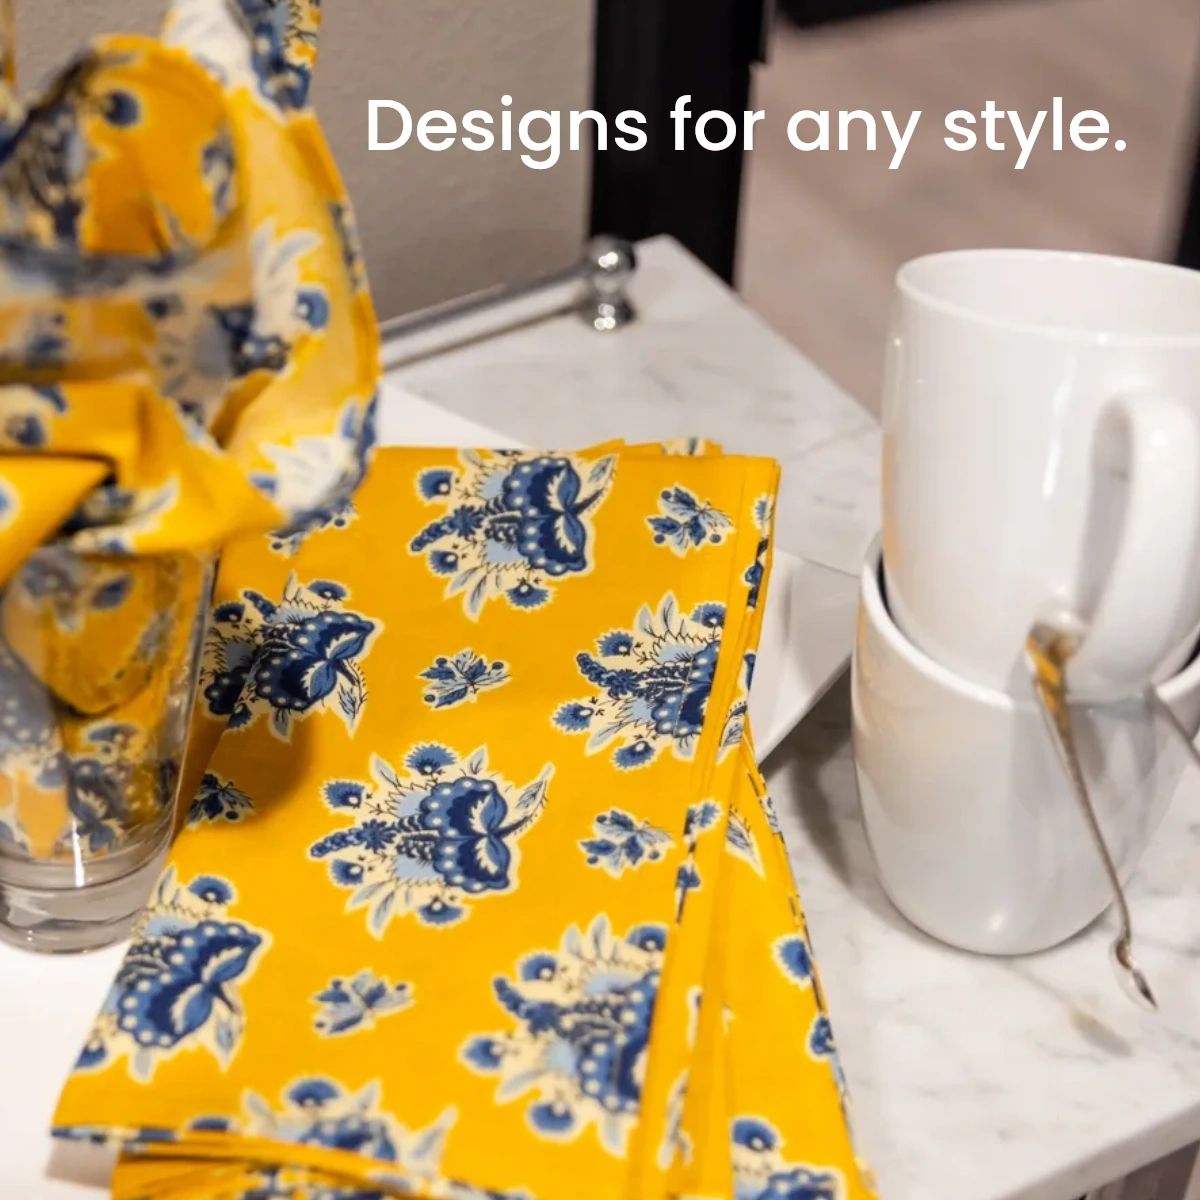 Whether you have yellow decor or red, we have unique designs to fit your home! Browse our collection of elegant tablecloths and napkins on our website. #MariasEuropeanLifeStyle  #TabletopDecor #ShopMarias #HomeDecor

shopmarias.com/shop